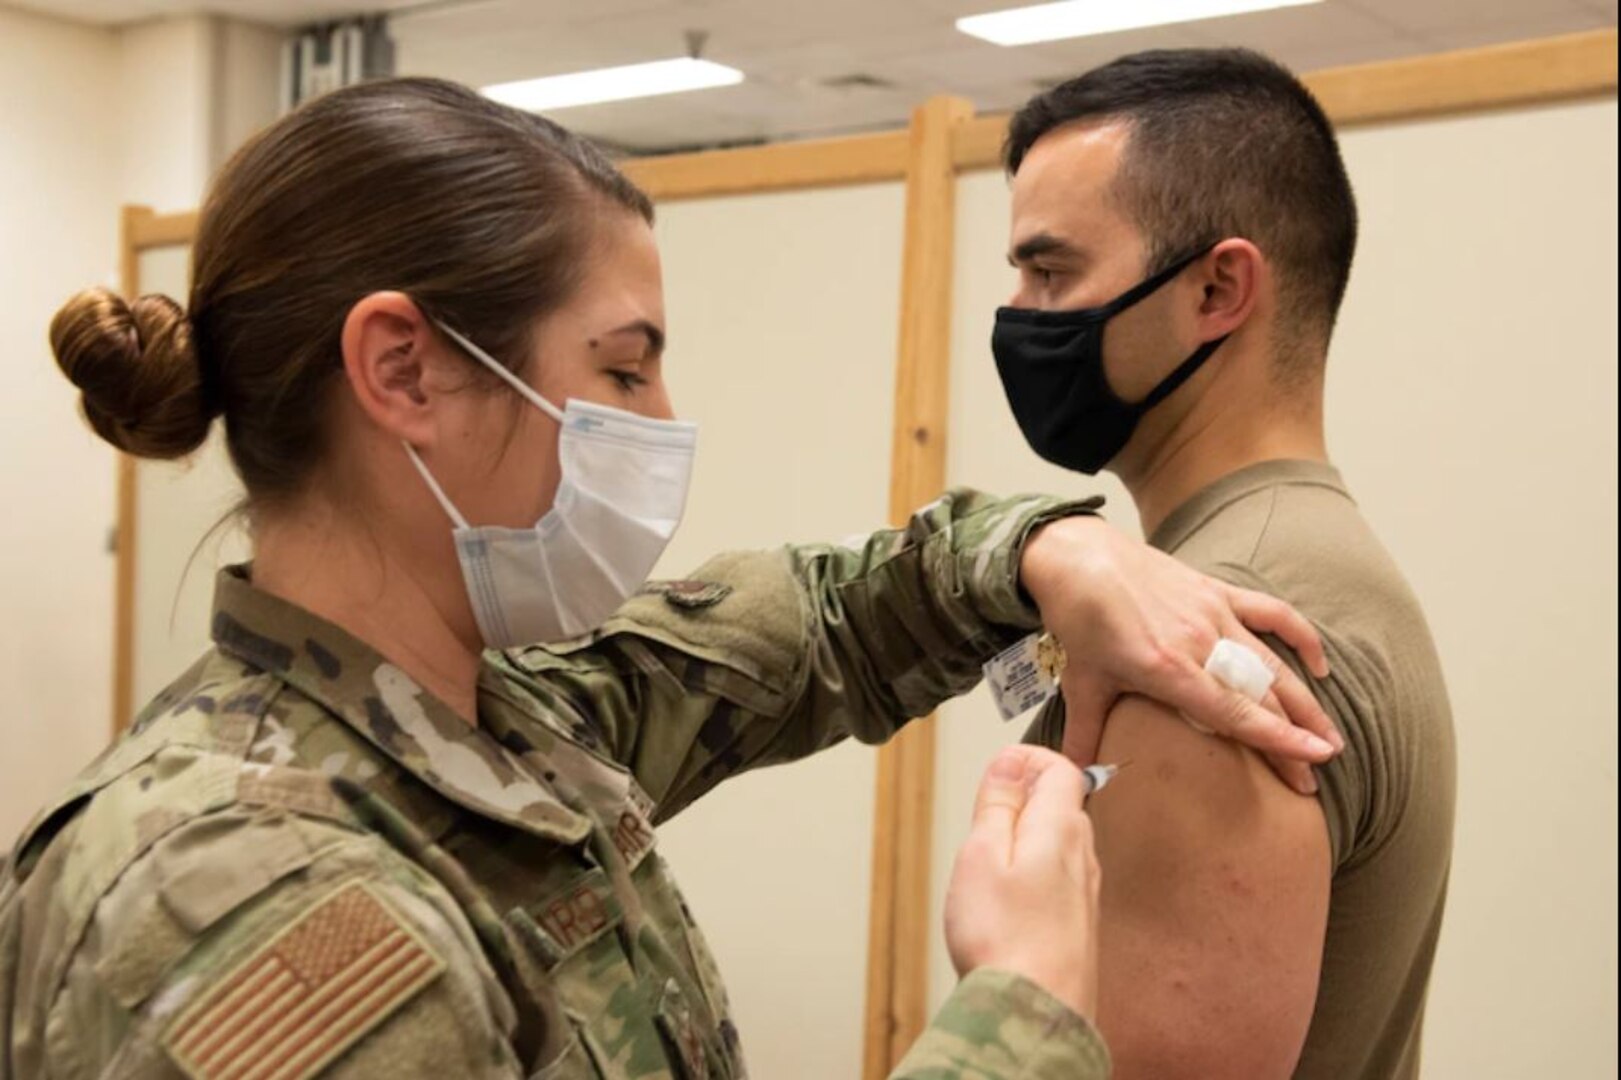 U.S. Air Force Staff Sgt. Kayla Blanchard, 39th Medical Group Immunization technician, administers a COVID-19 vaccination to Capt. Brent Luch, 39th Security Forces Squadron operations officer, during the initial series of vaccinations Jan. 8, 2021, at Incirlik Air Base, Turkey. Prioritized DoD personnel are highly encouraged to take the vaccine to protect their health, their families, their community, and lower the public health risks associated with the COVID-19 pandemic. (U.S. Air Force photo by Staff Sgt. Ryan Lackey)